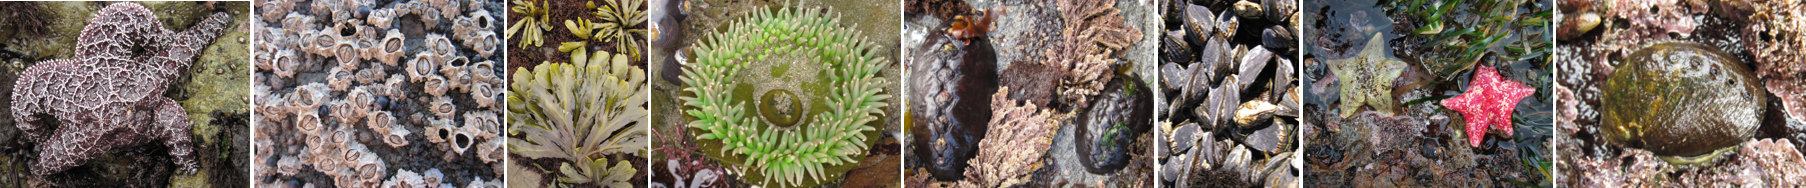 Pacific Rocky Intertidal Monitoring Banner Image - Full